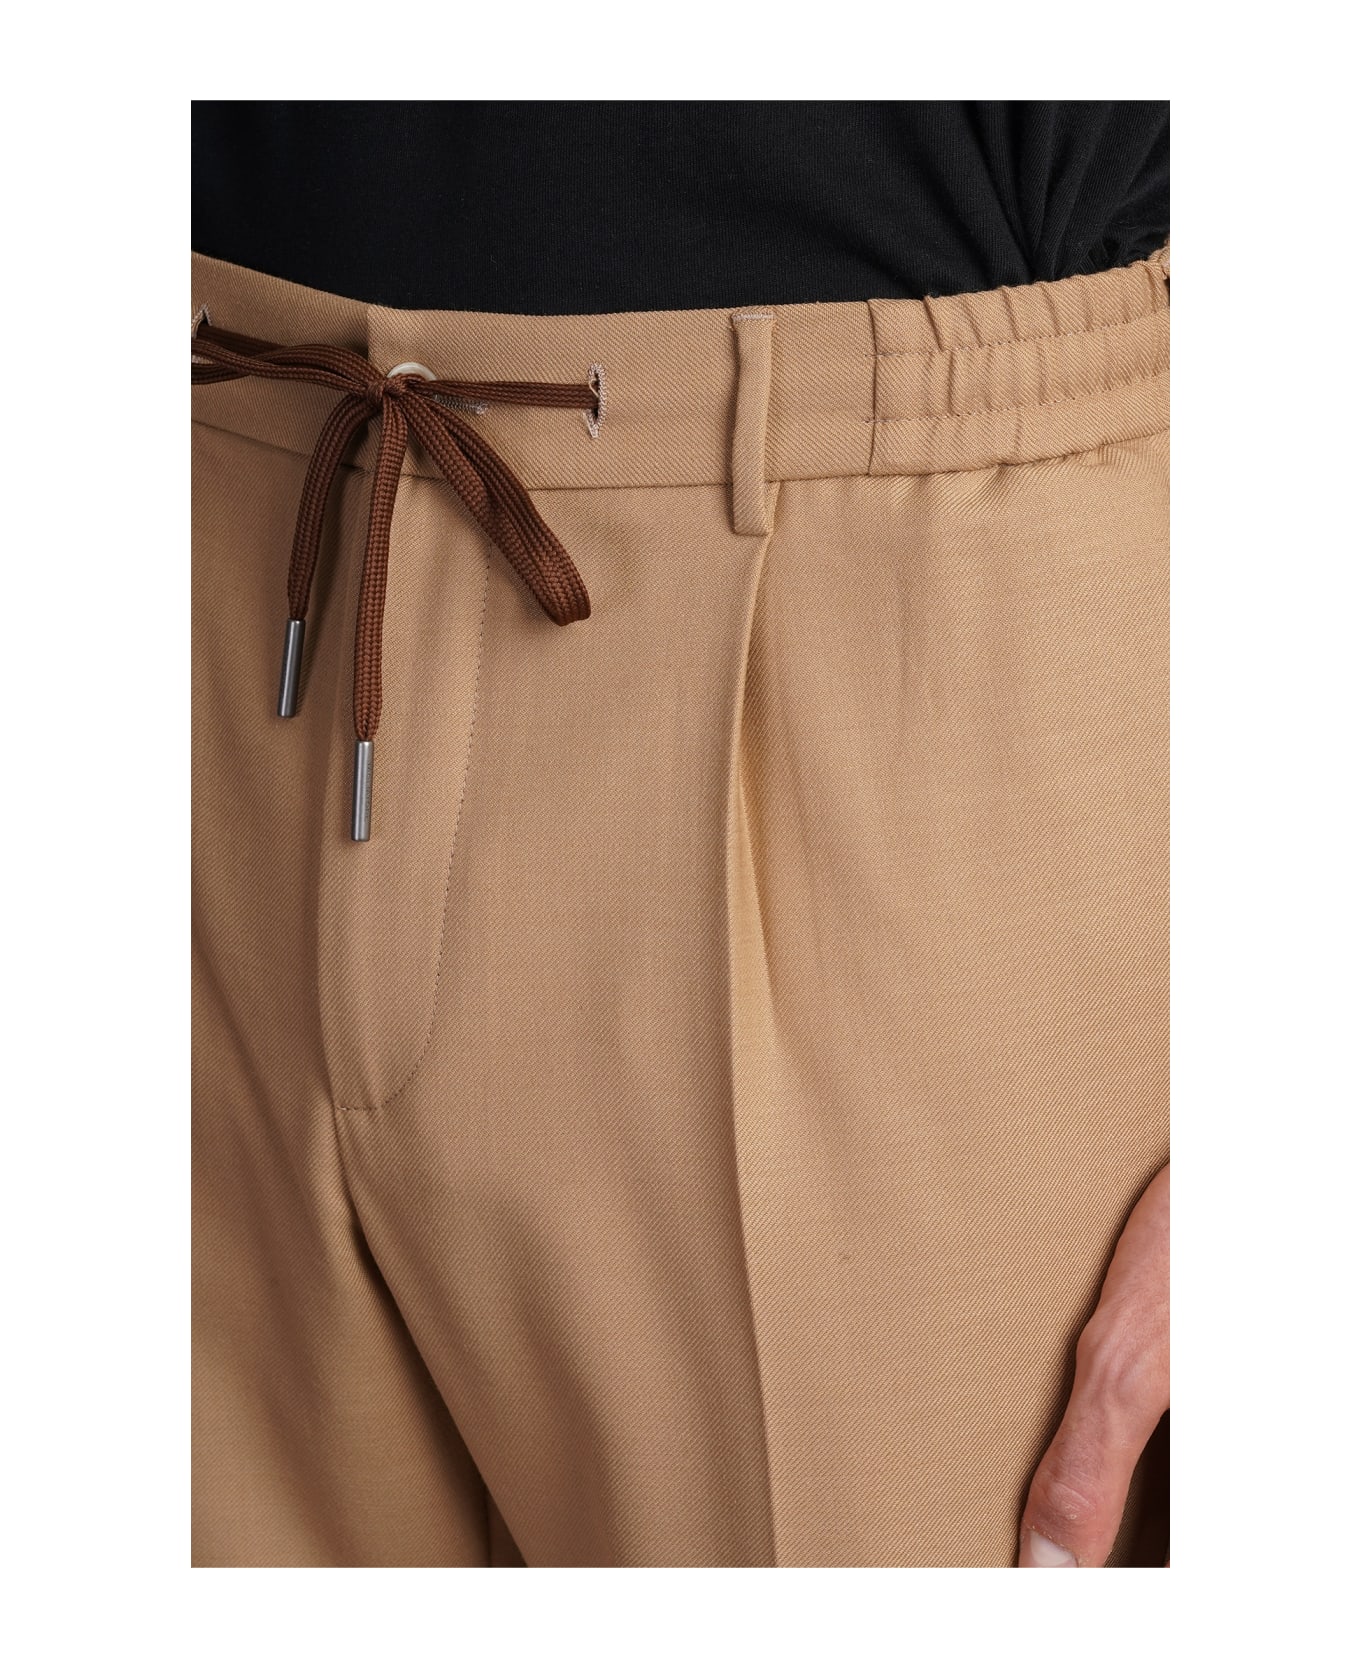 Tagliatore 0205 Pants In Camel Polyester - Camel